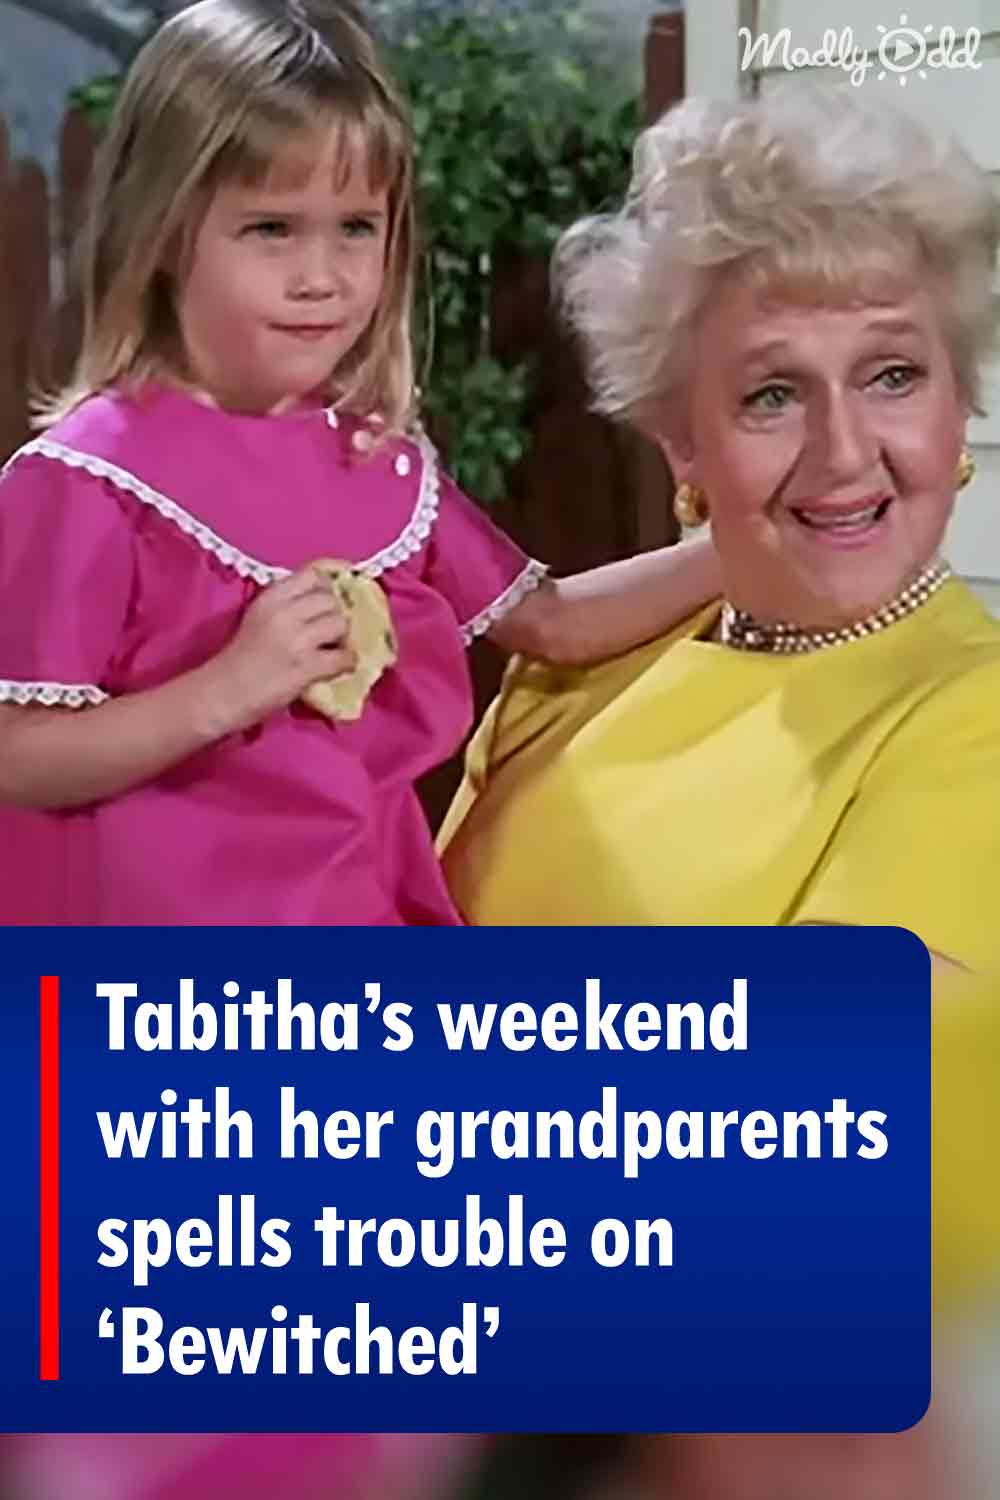 Tabitha’s weekend with her grandparents spells trouble on ‘Bewitched’